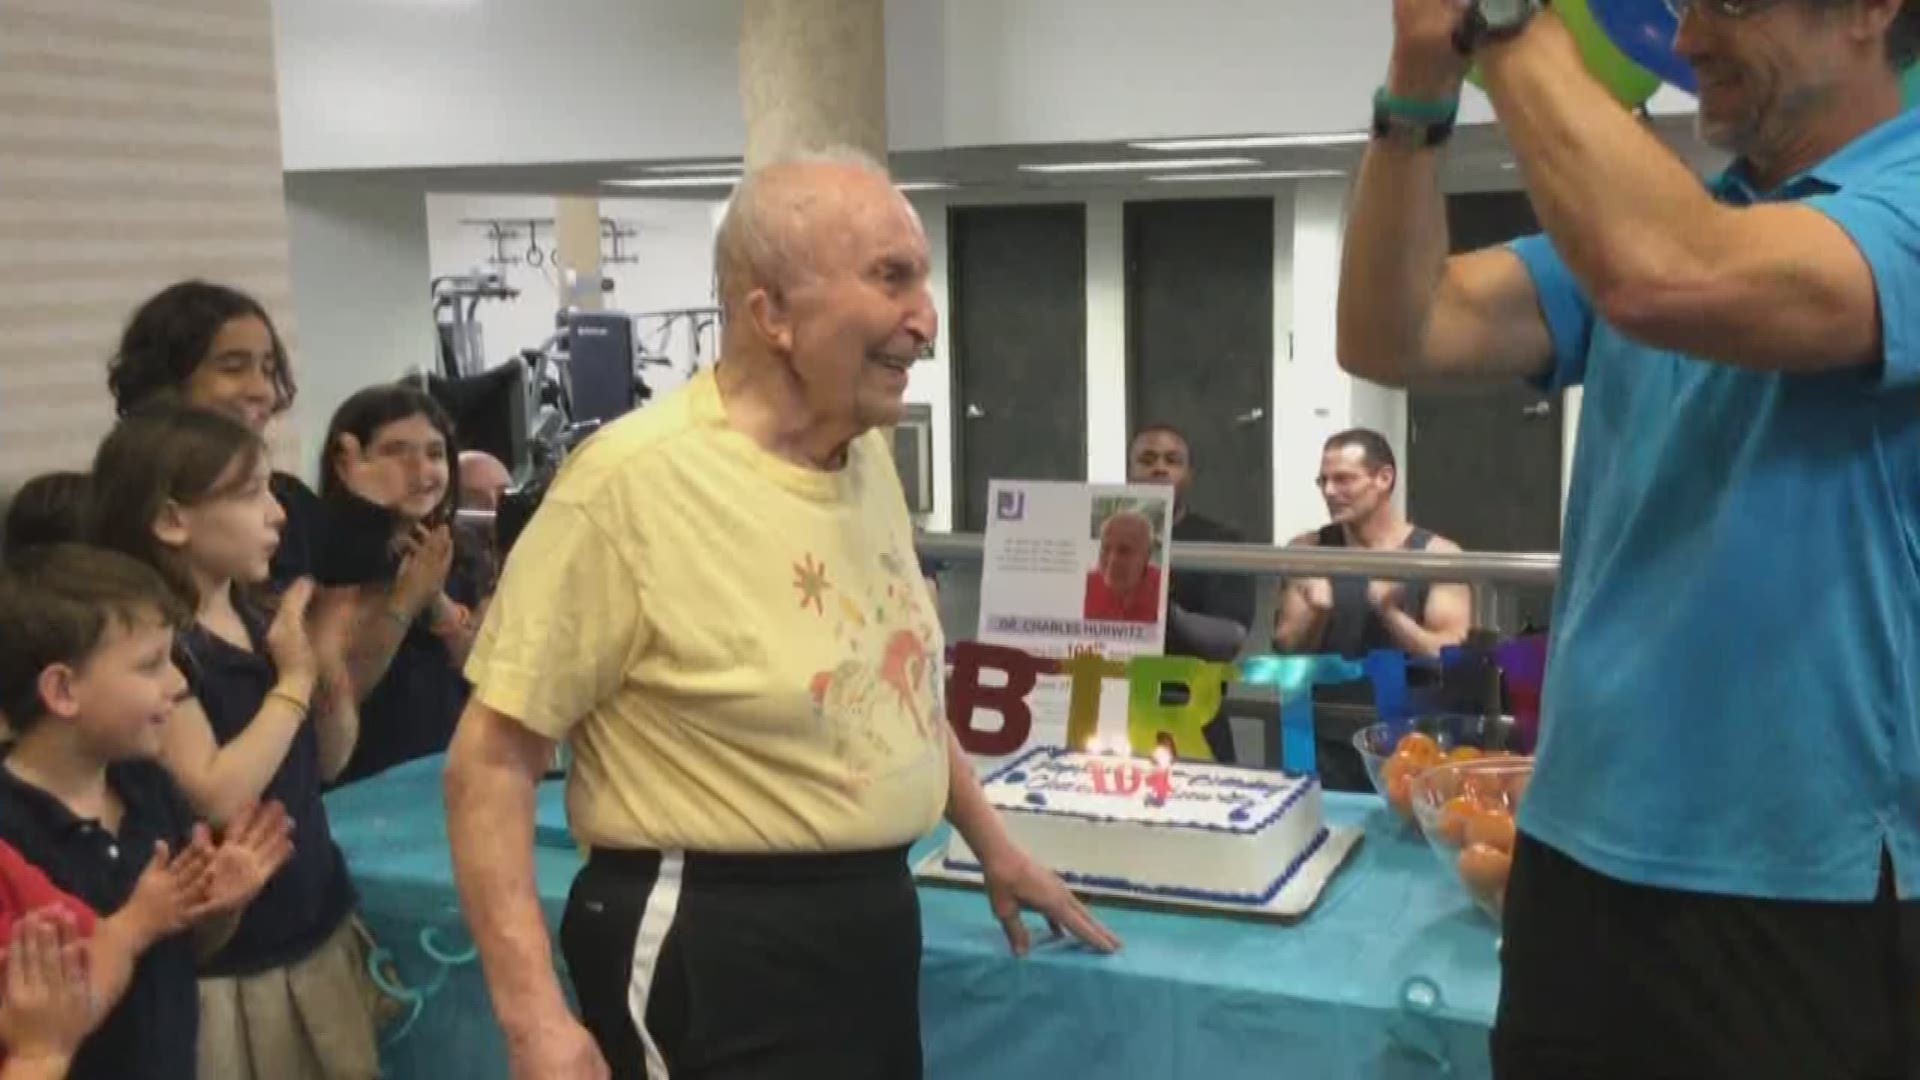 Dr. Charles Hurwitz, a staple at the Evelyn Rubenstein Community Center, celebrated his 104th birthday with family and friends. Hurwitz works out on the treadmill and stairmaster three times a week at the center.